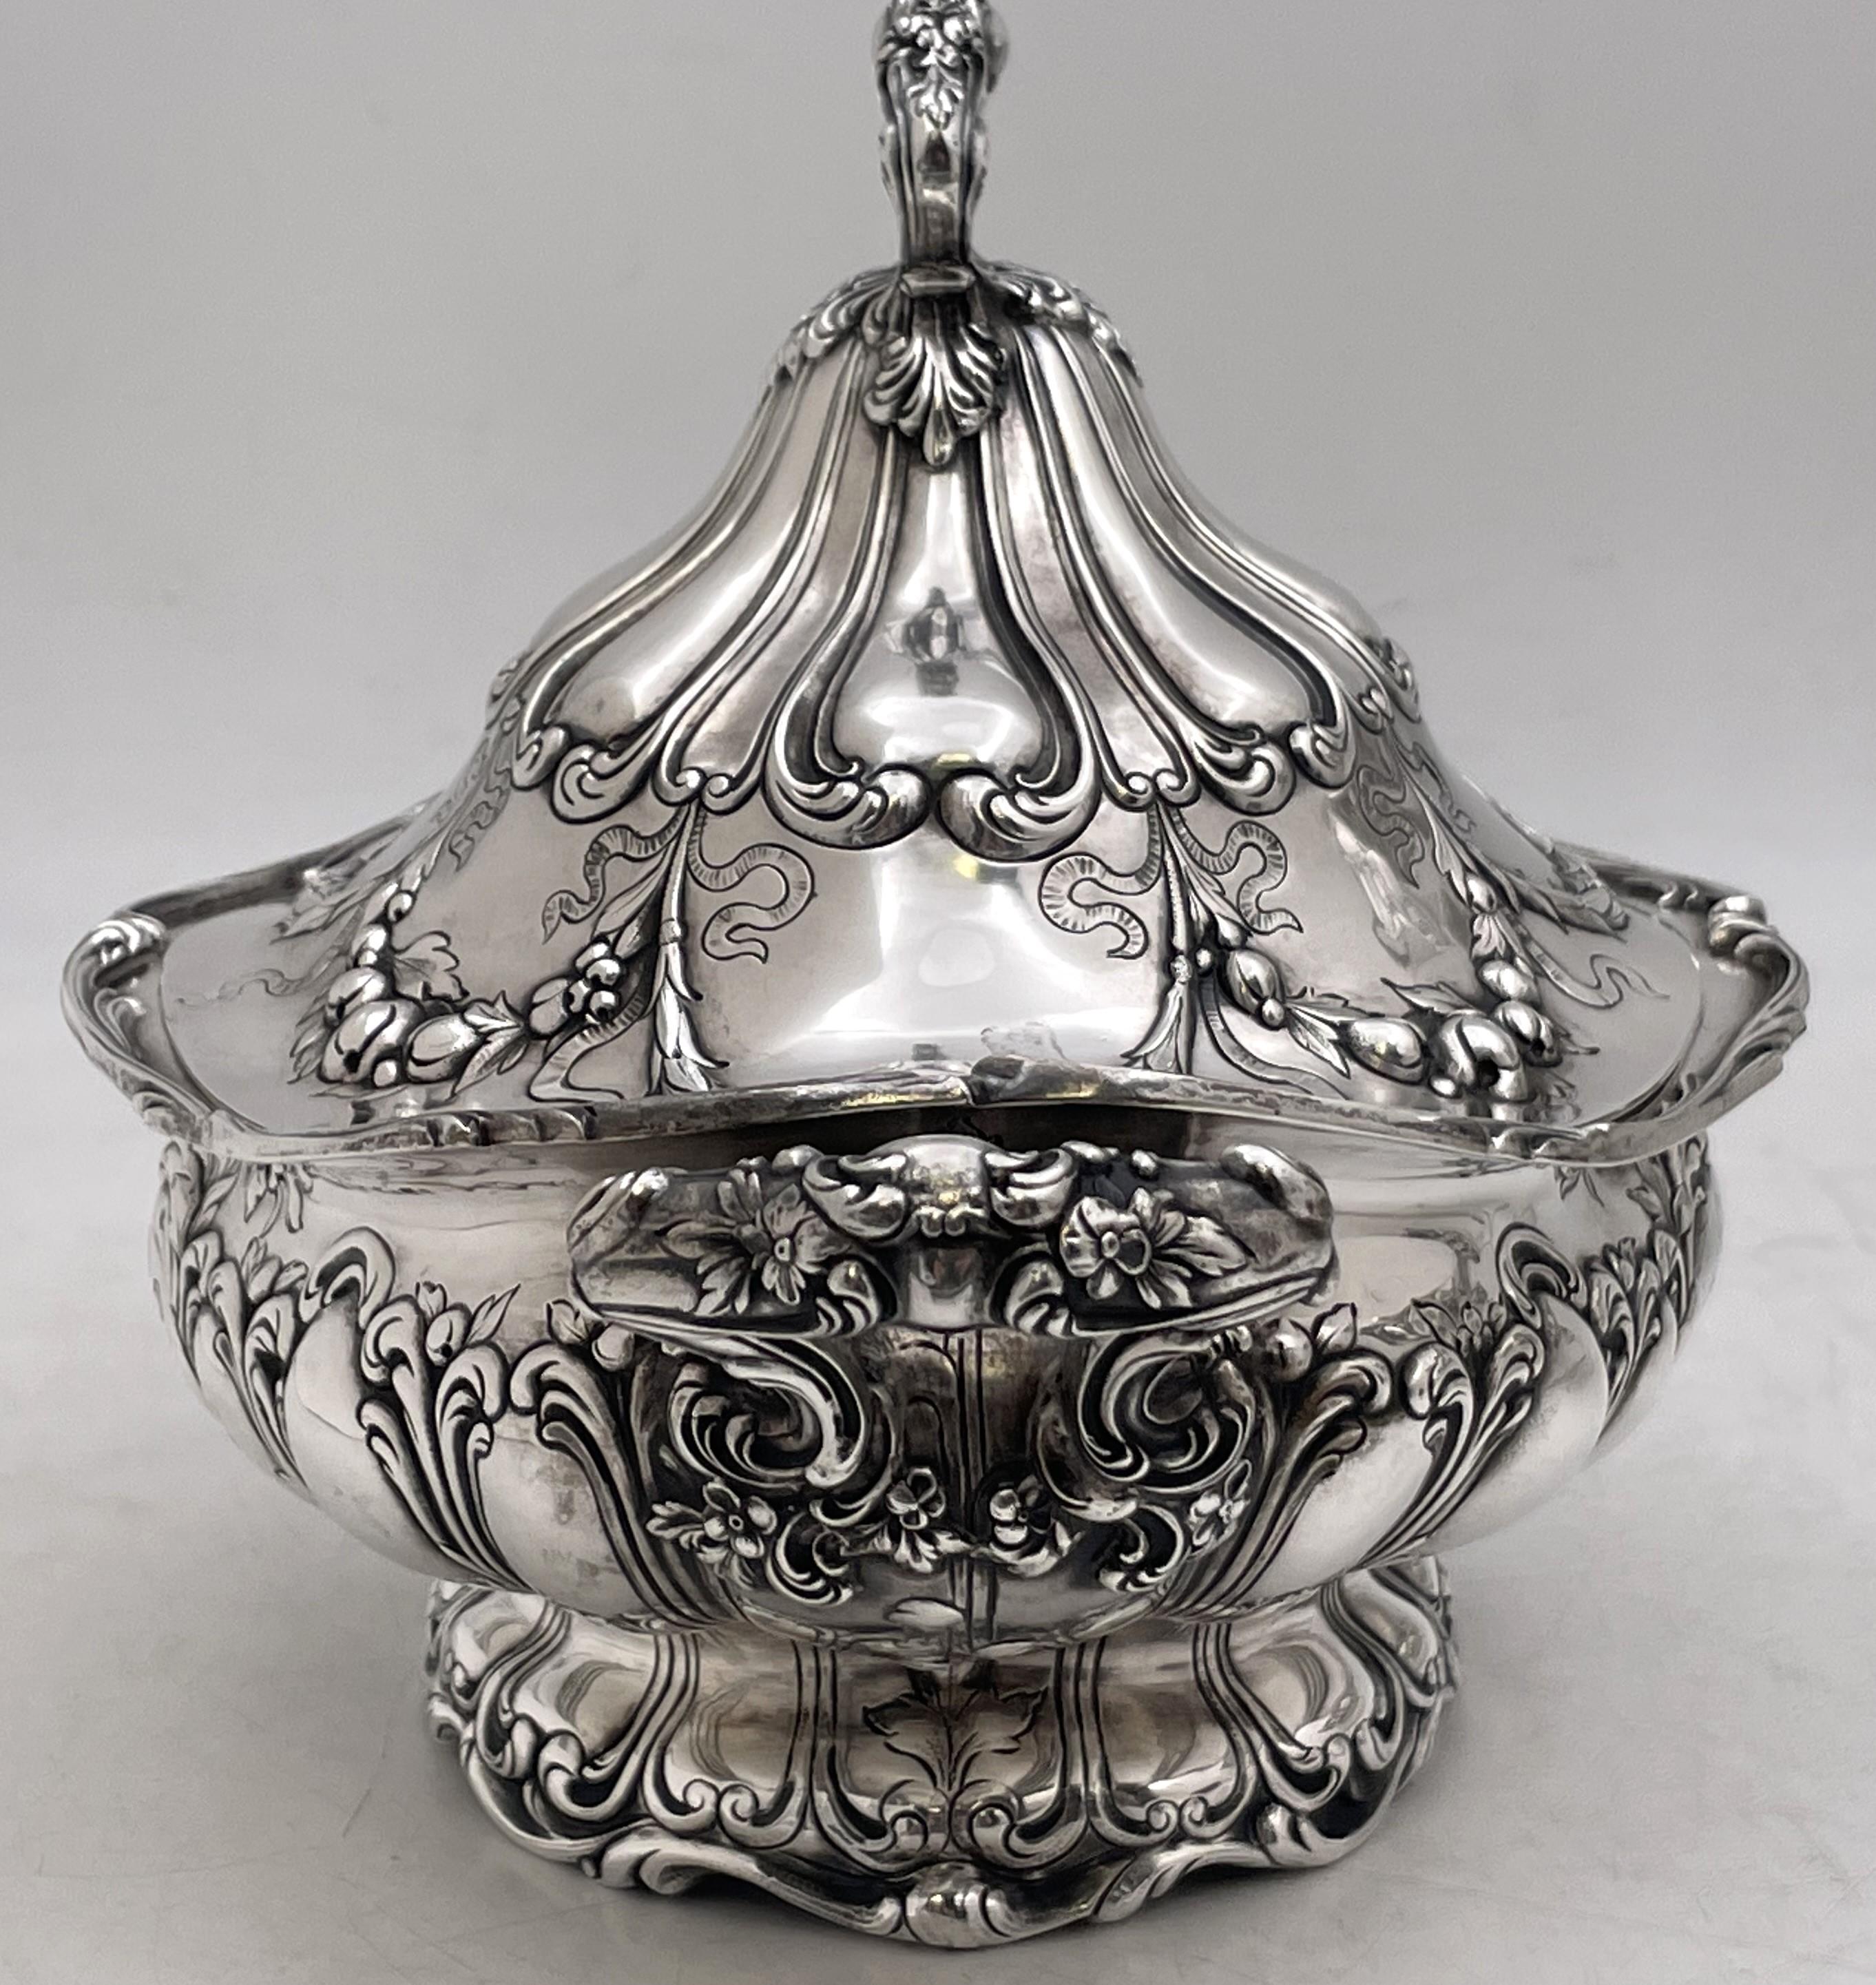 American Gorham Chantilly Grande Pair of Sterling Silver 1900 Tureens Art Nouveau Style For Sale